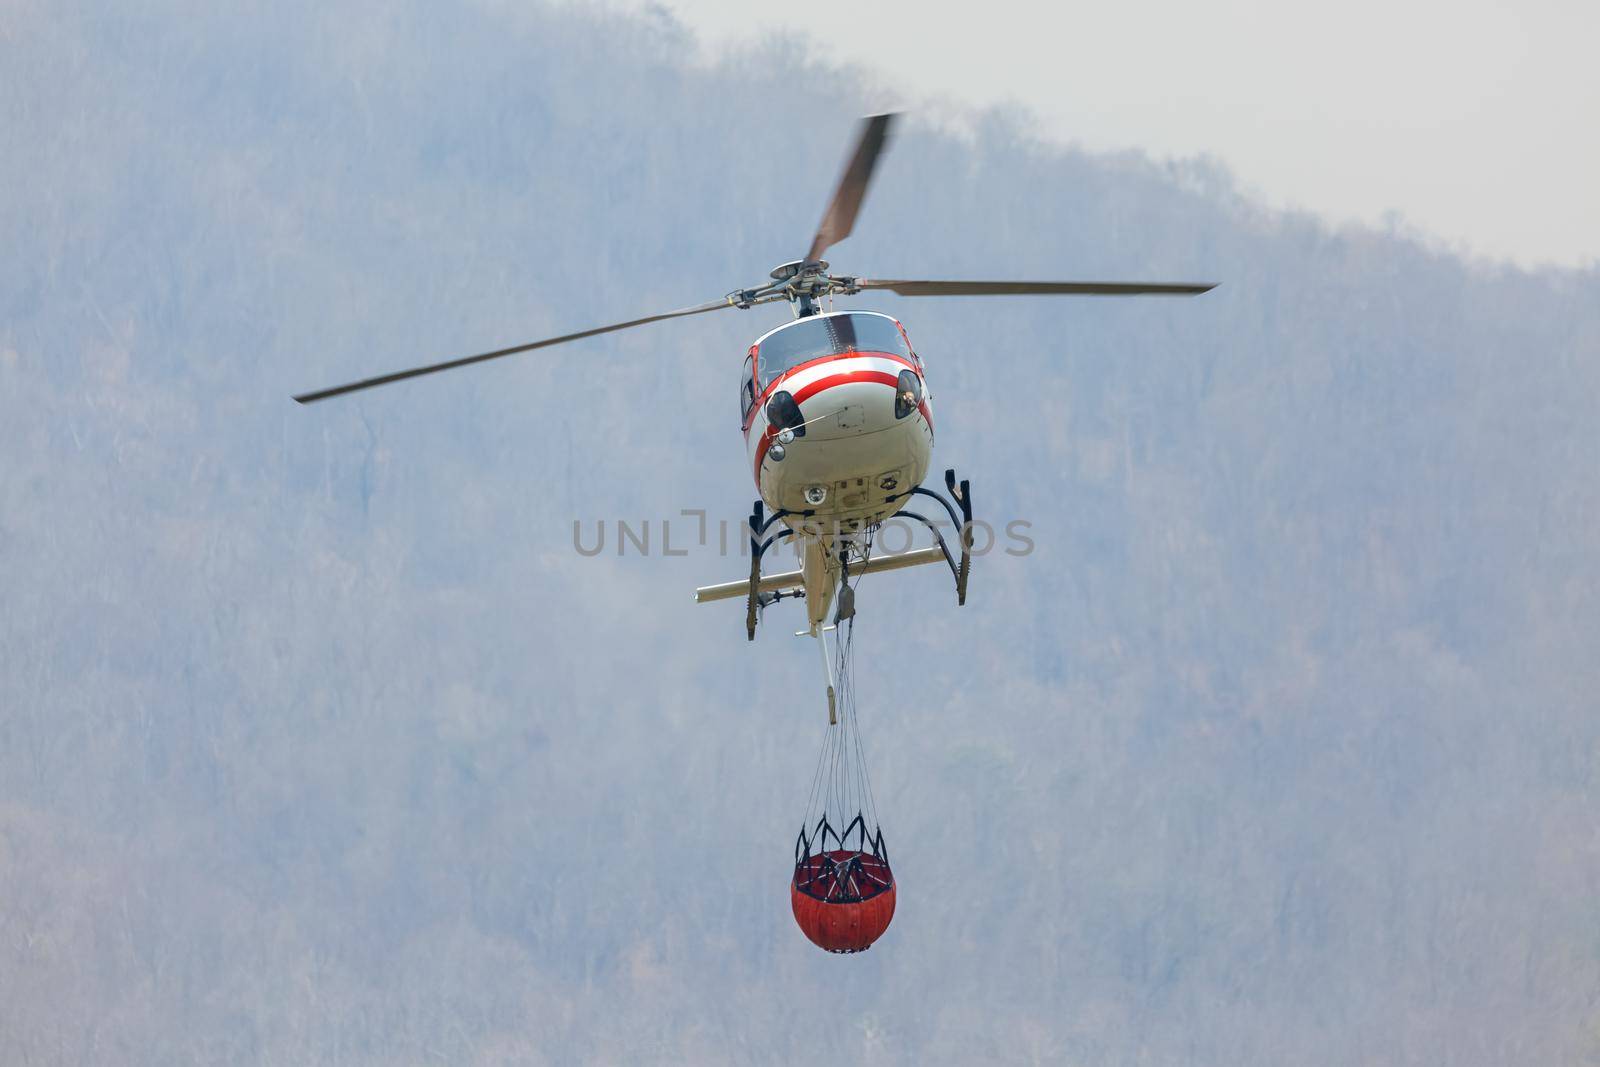 Firefighting  helicopter carrying  water bucket for 
extinguish forest fire ,  comeback at lake to filling water by toa55